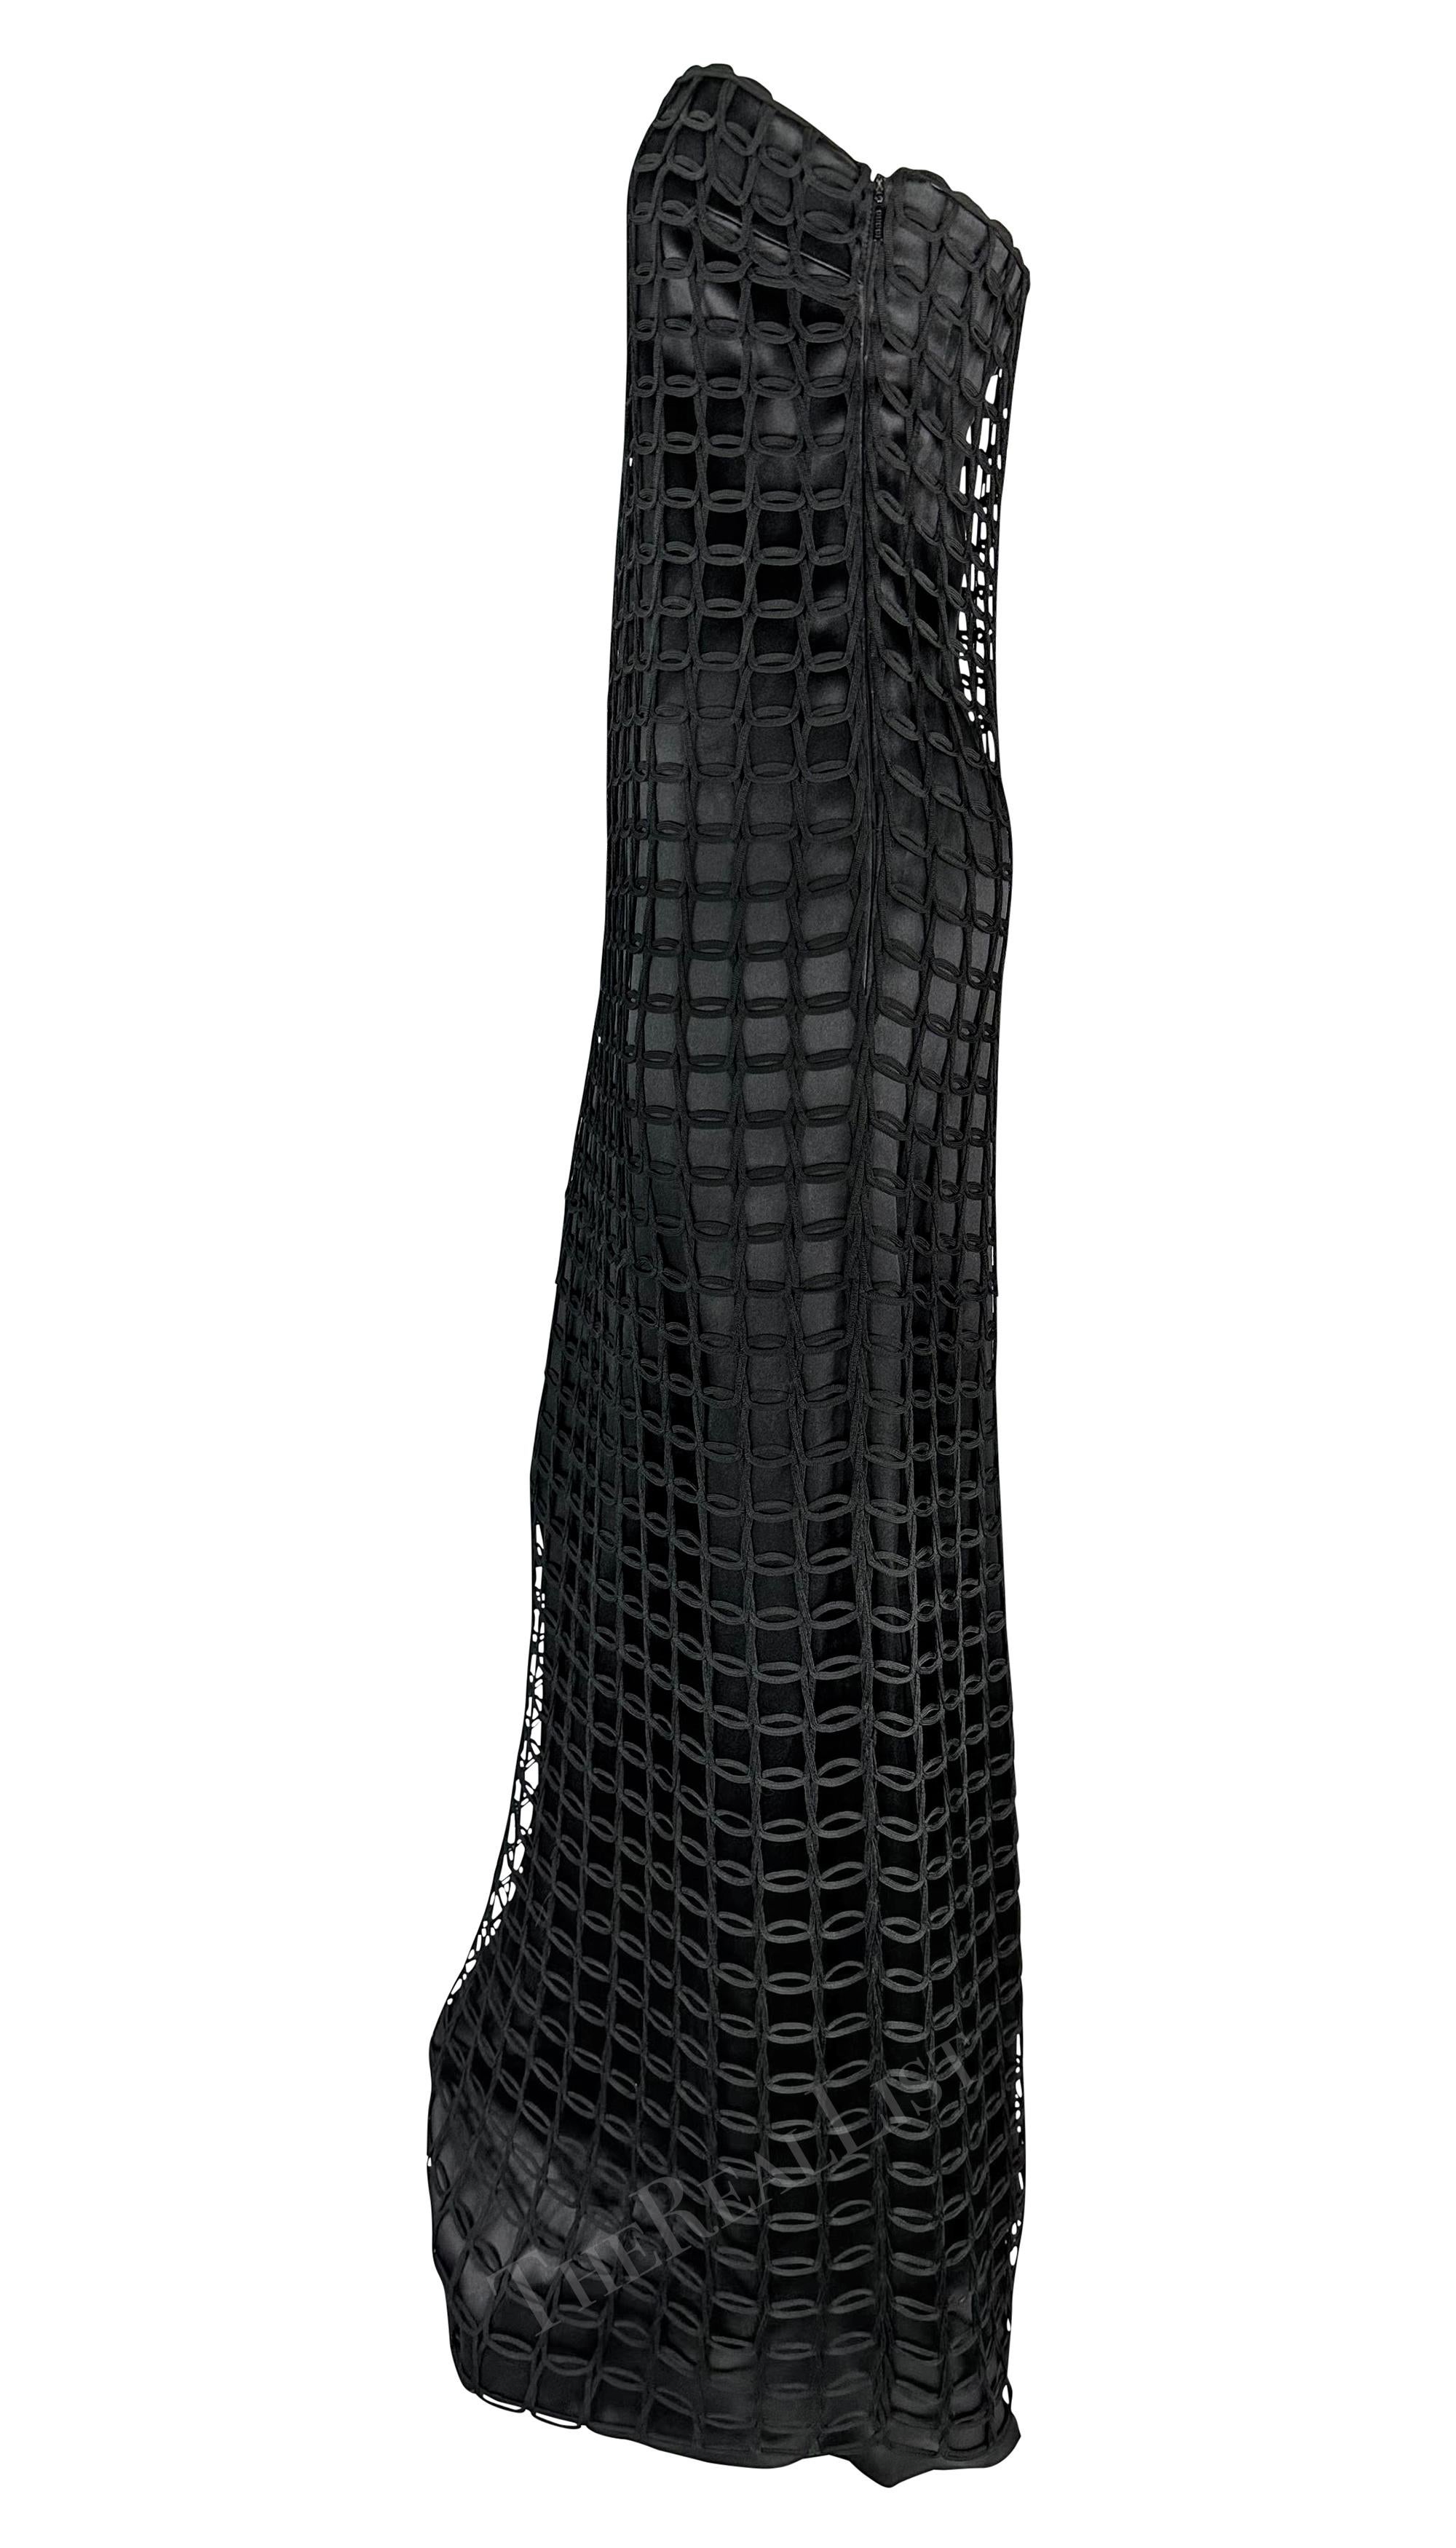 Women's 2001 Gucci by Tom Ford Sample Black Net Overlay Strapless Satin Gown For Sale